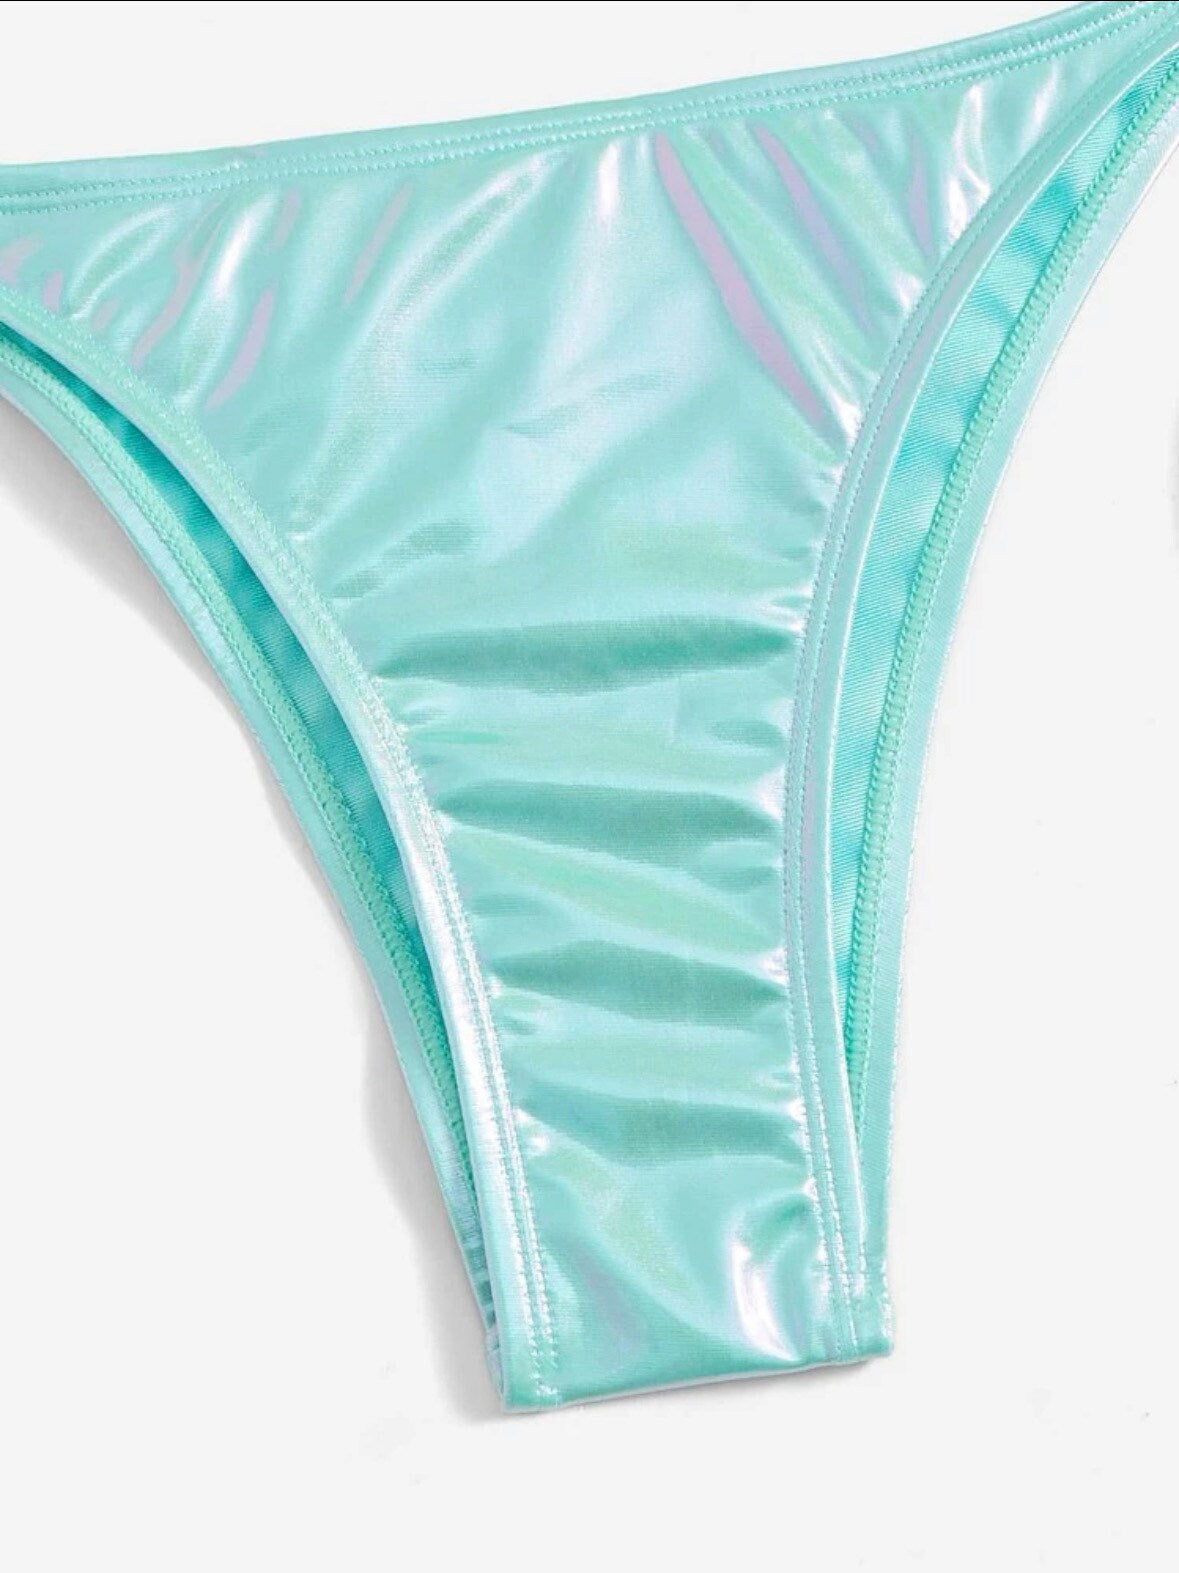 The Metallic Sara blue swim bikini with tie sides and solid metallic light blue print triangle halter top tie and bottoms swimsuit set